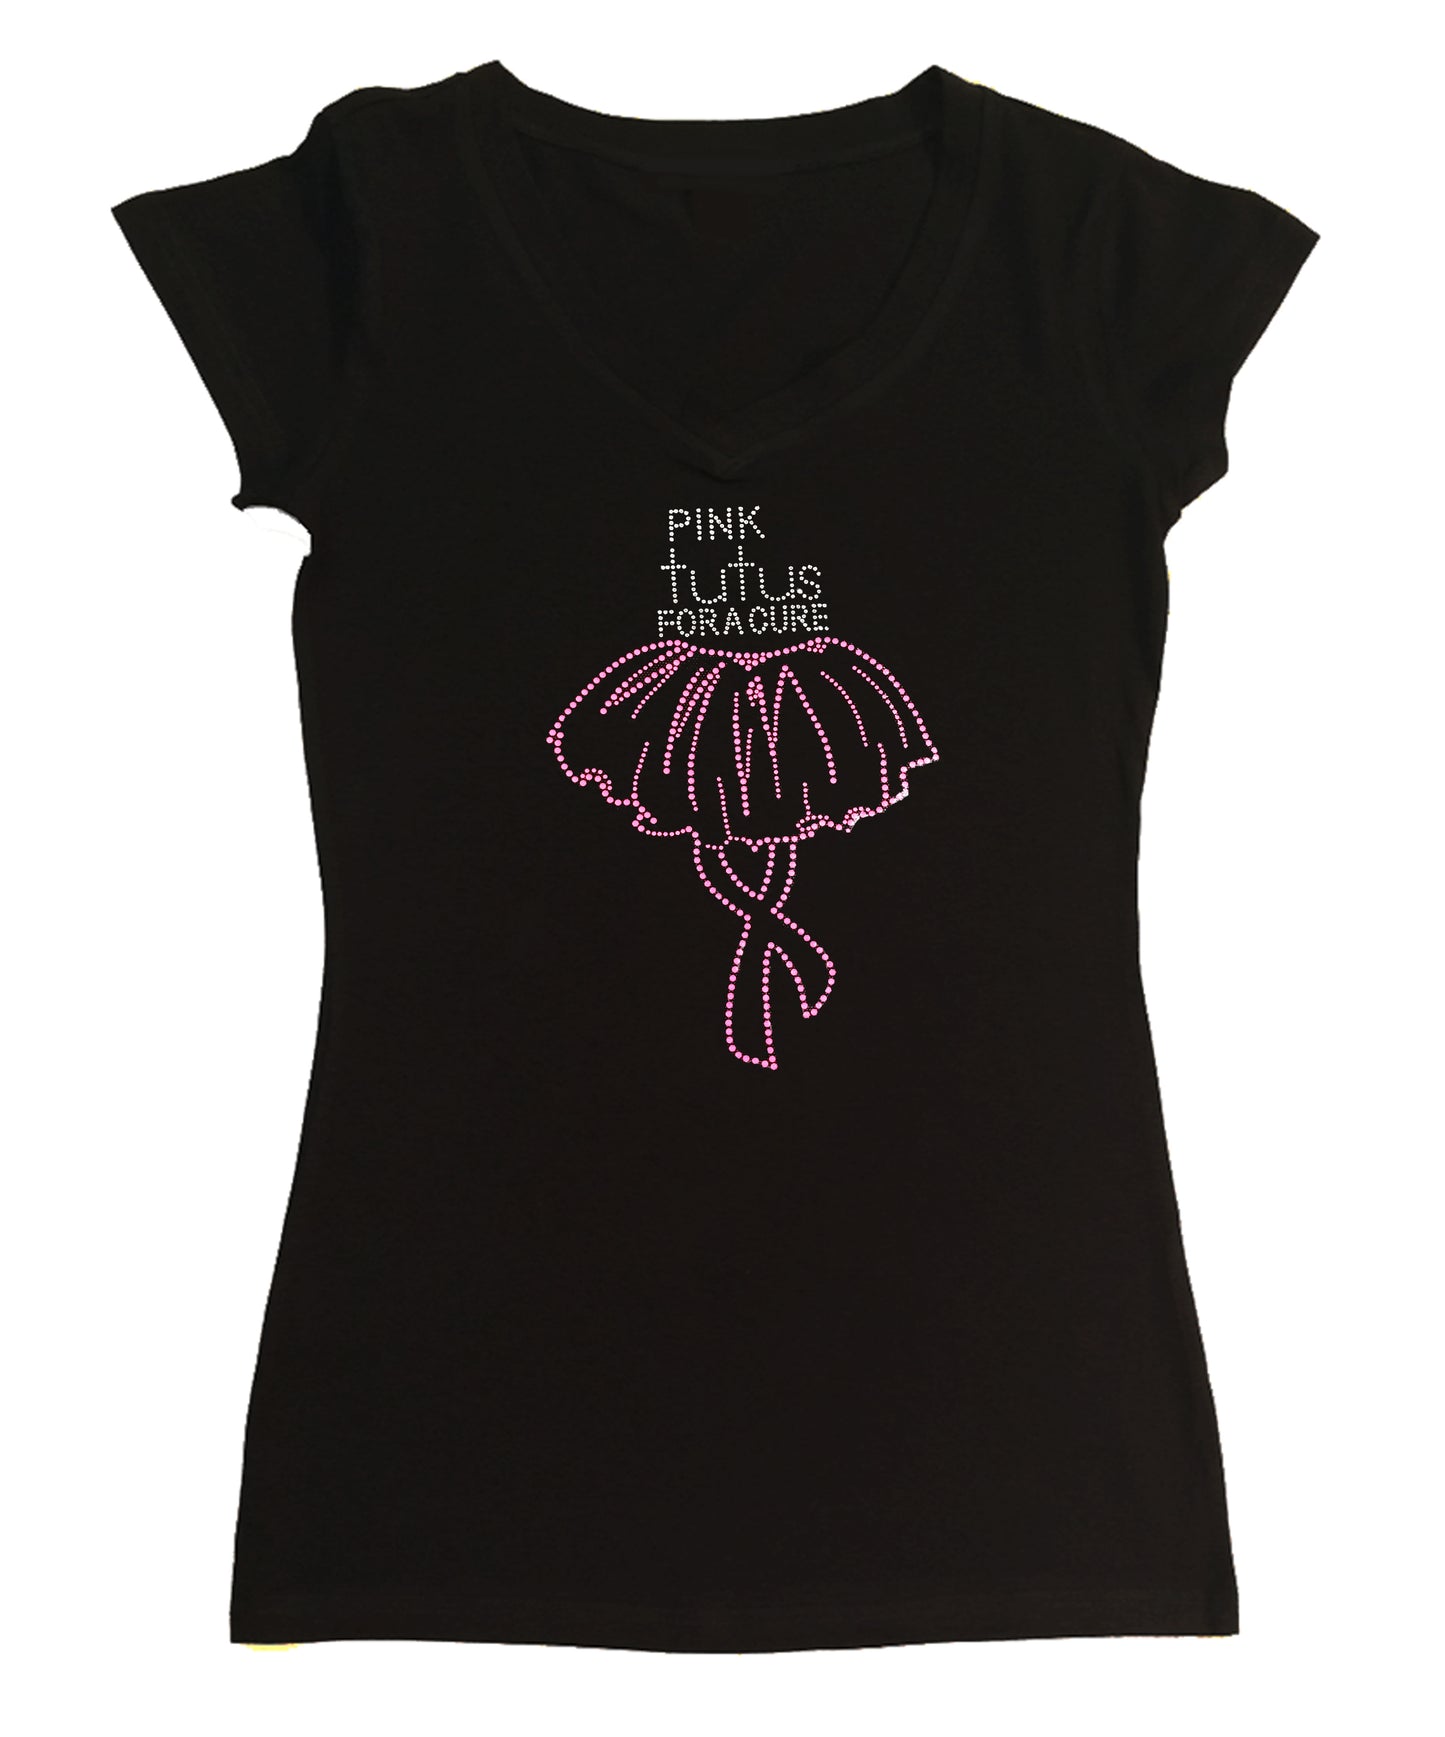 Womens T-shirt with Pink Tutus for a Cure Cancer Awarness in Rhinestones